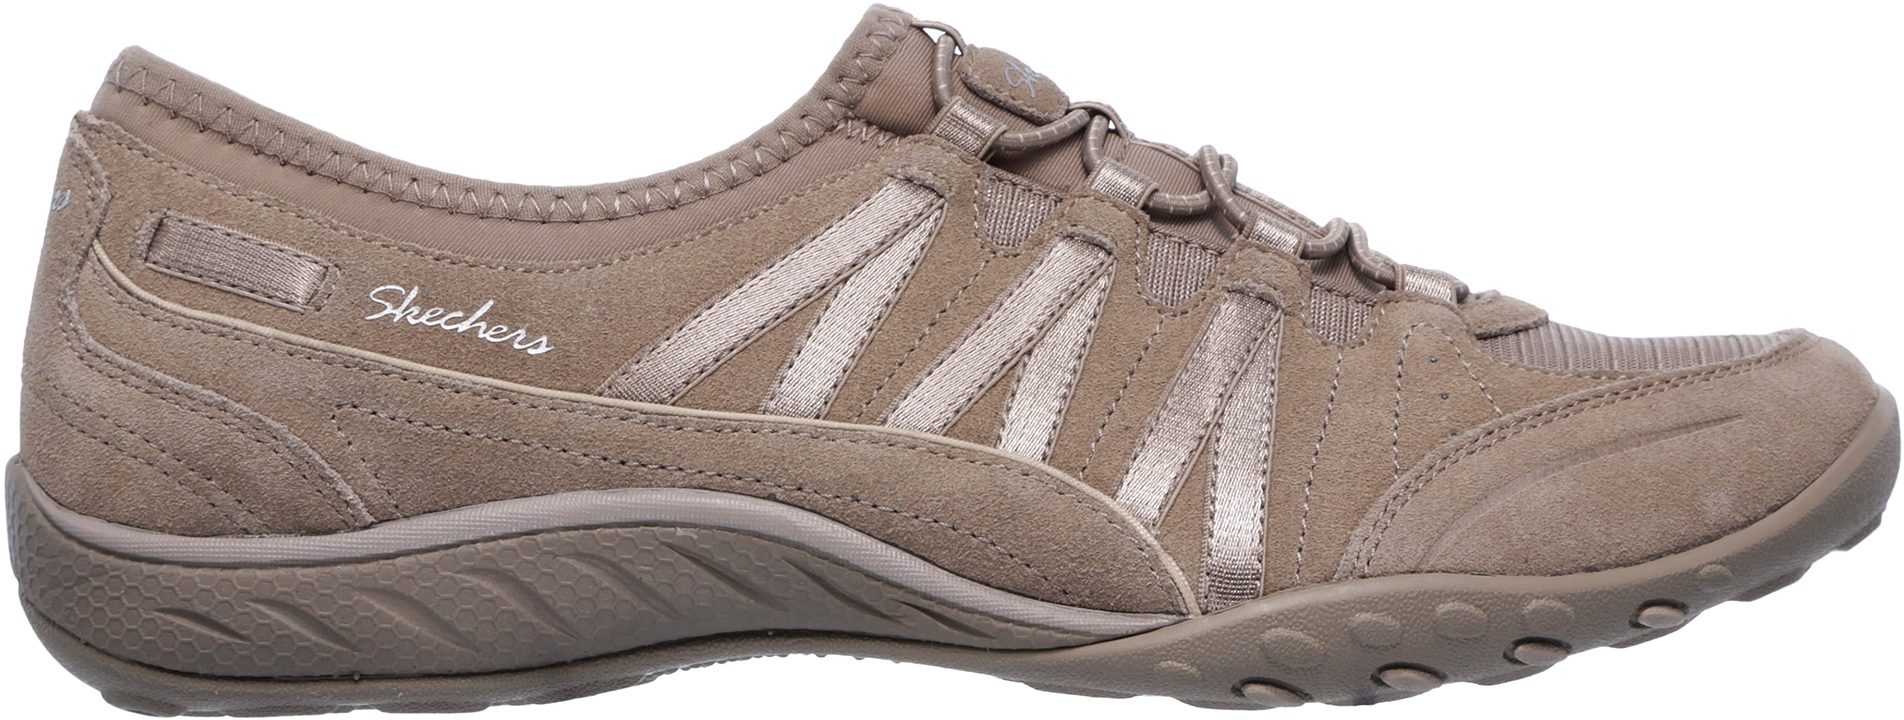 Skechers Breathe-Easy - Moneybags Taupe 23020 TPE - Womens Trainers ...